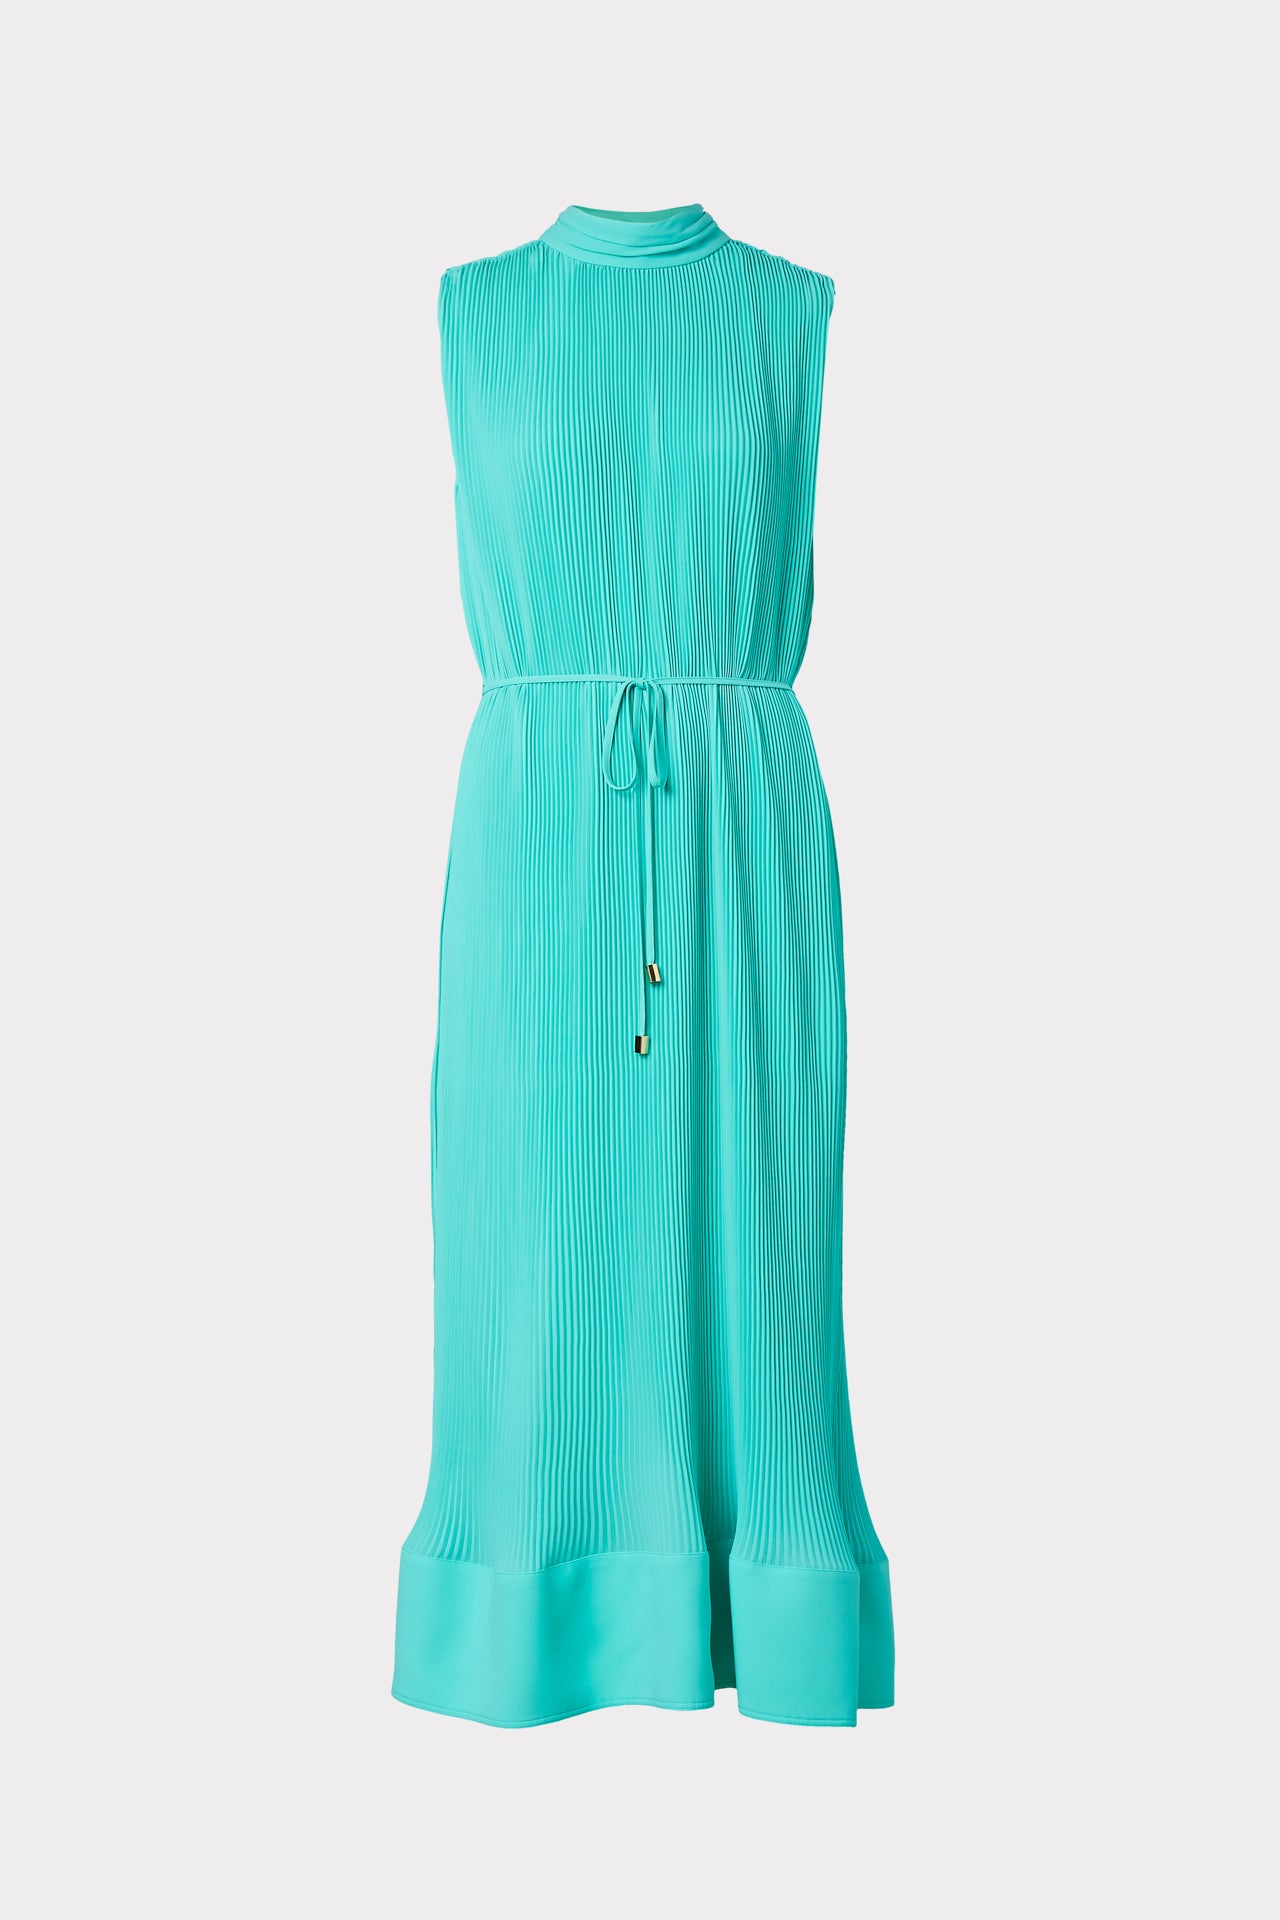 Milly Melina Solid Pleated Dress In Mint